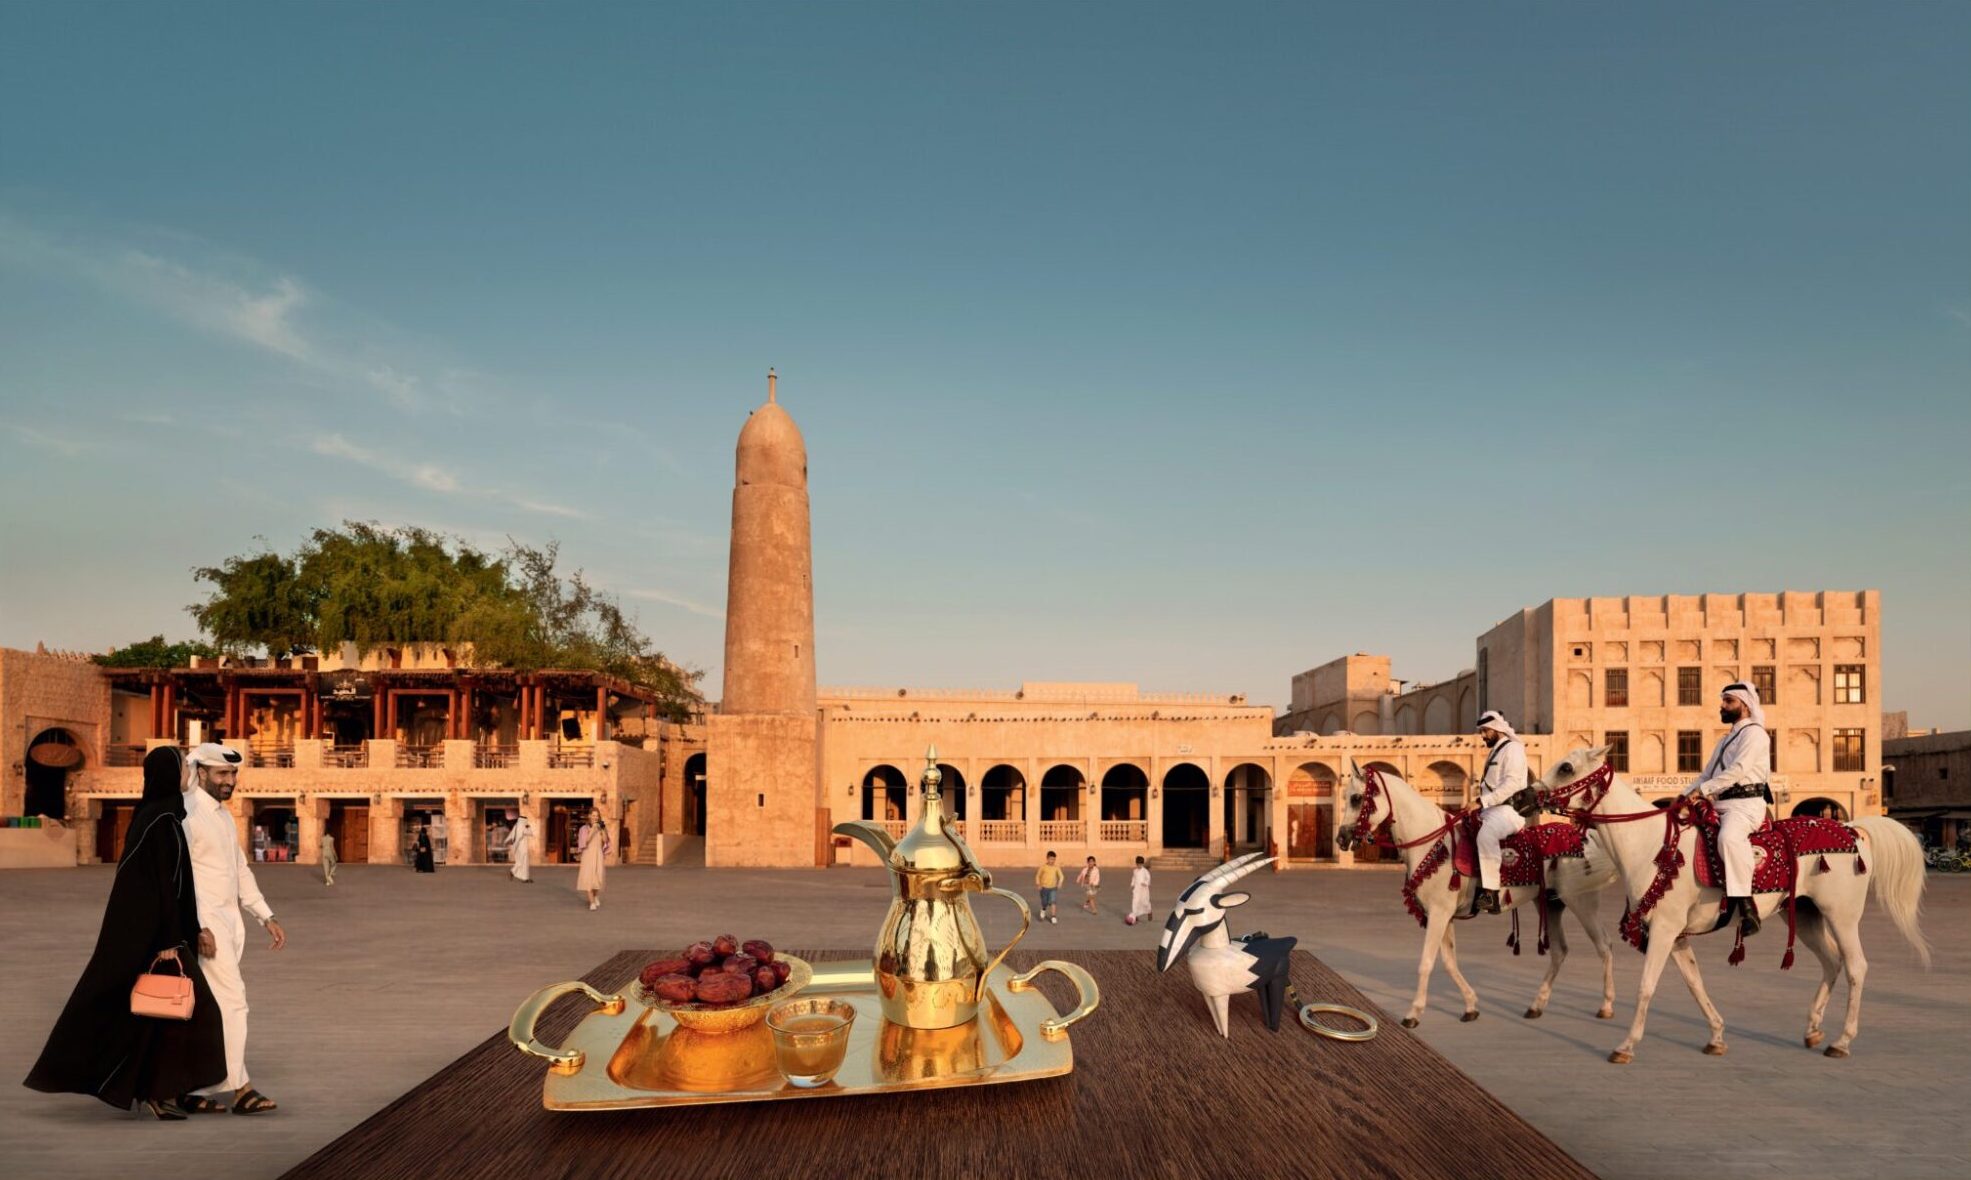 Qatar Tourism launches 'Experience a World Beyond' promo campaign